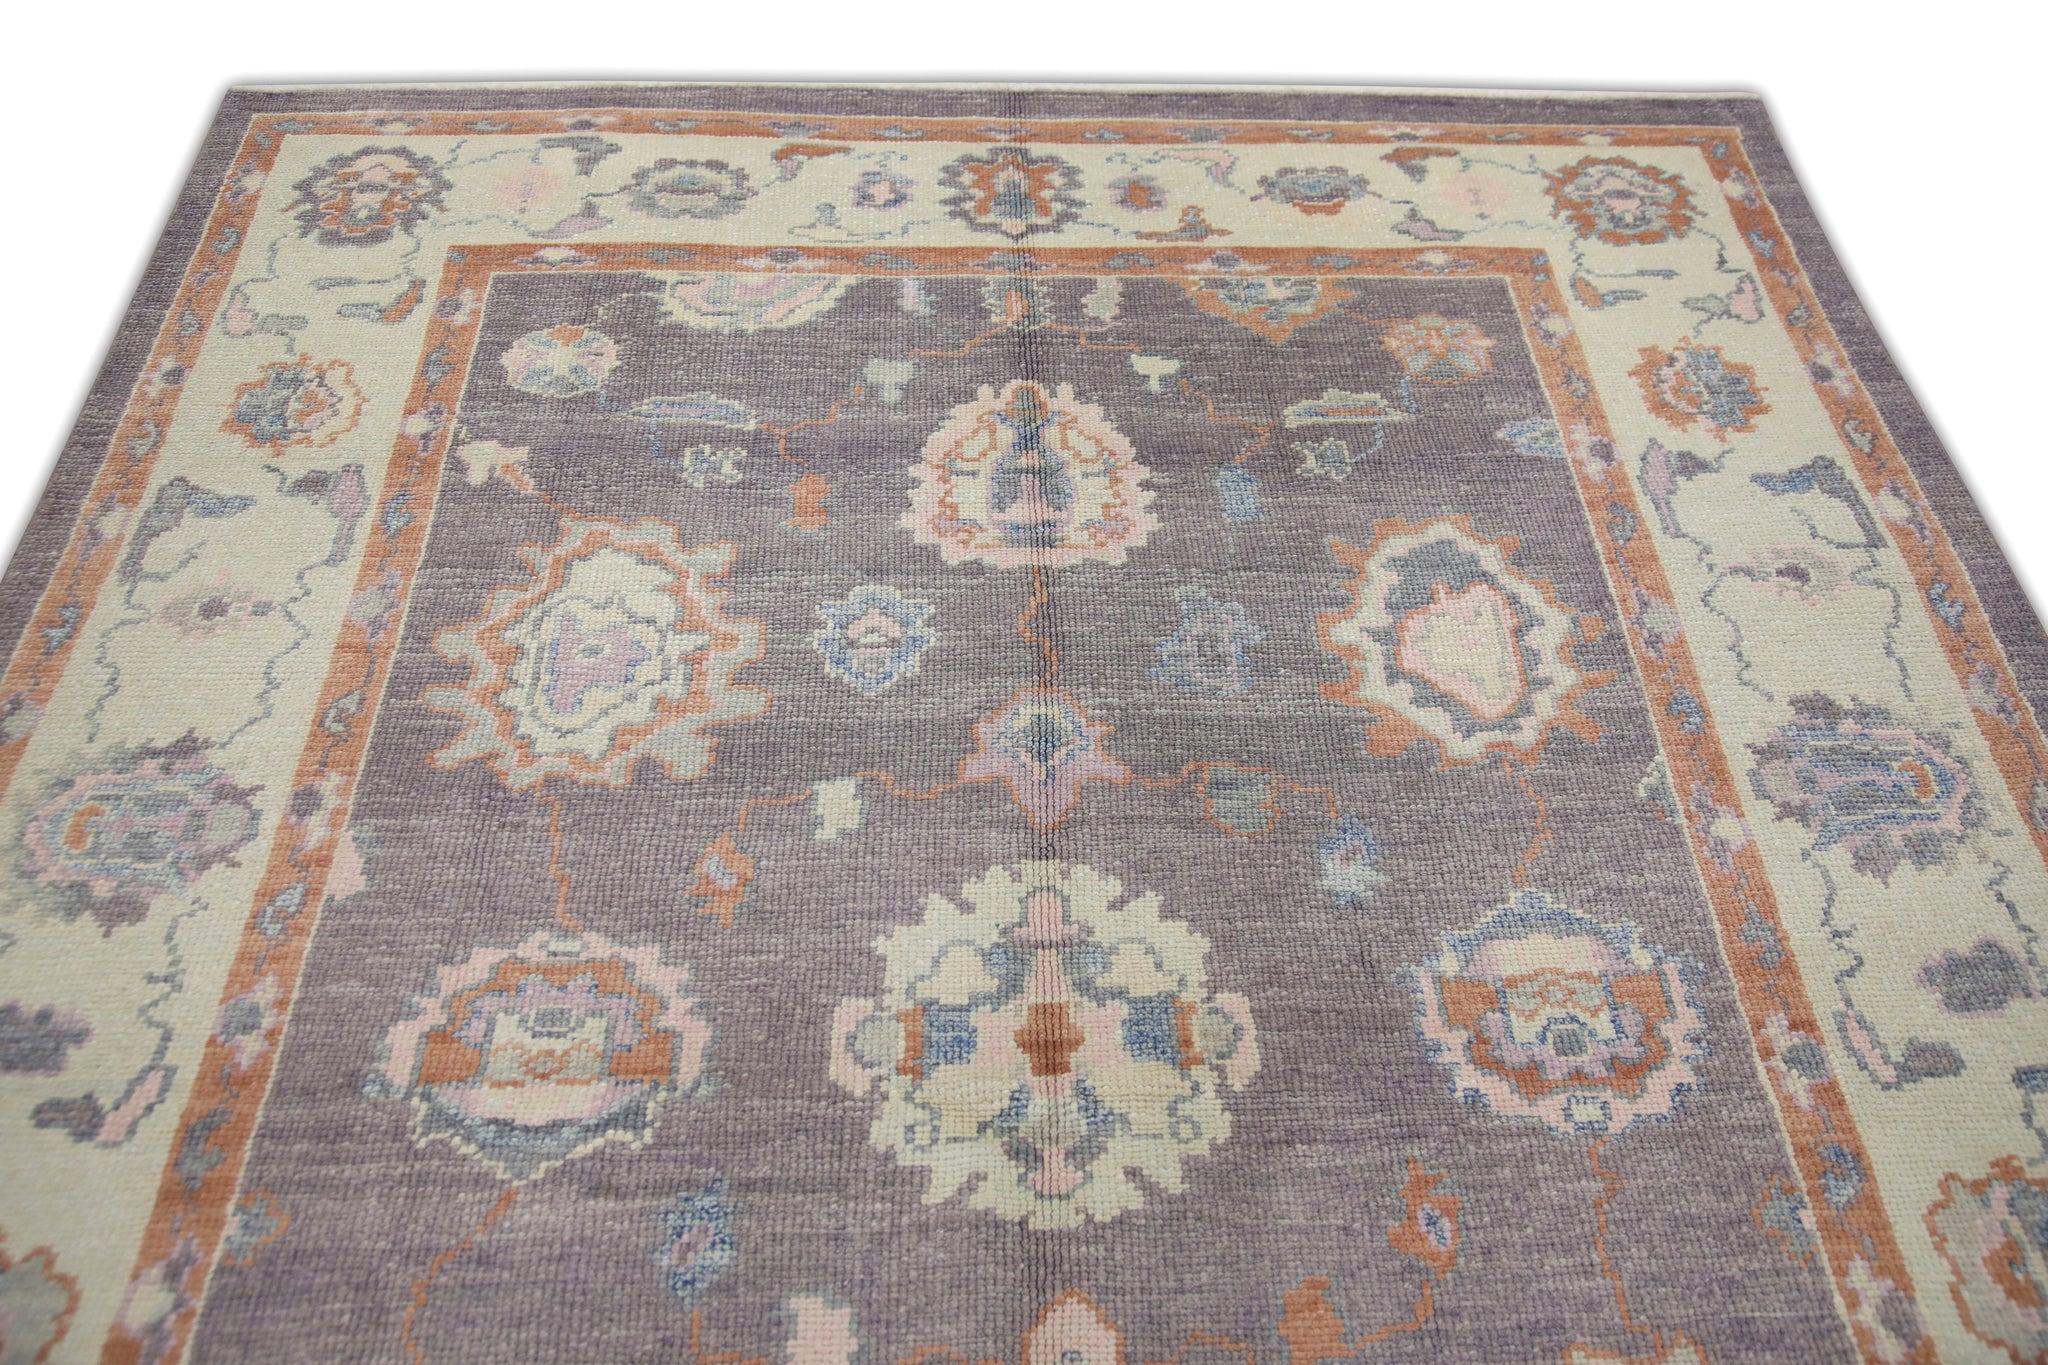 Purple and Red Floral Design Handwoven Wool Turkish Oushak Rug 6'2